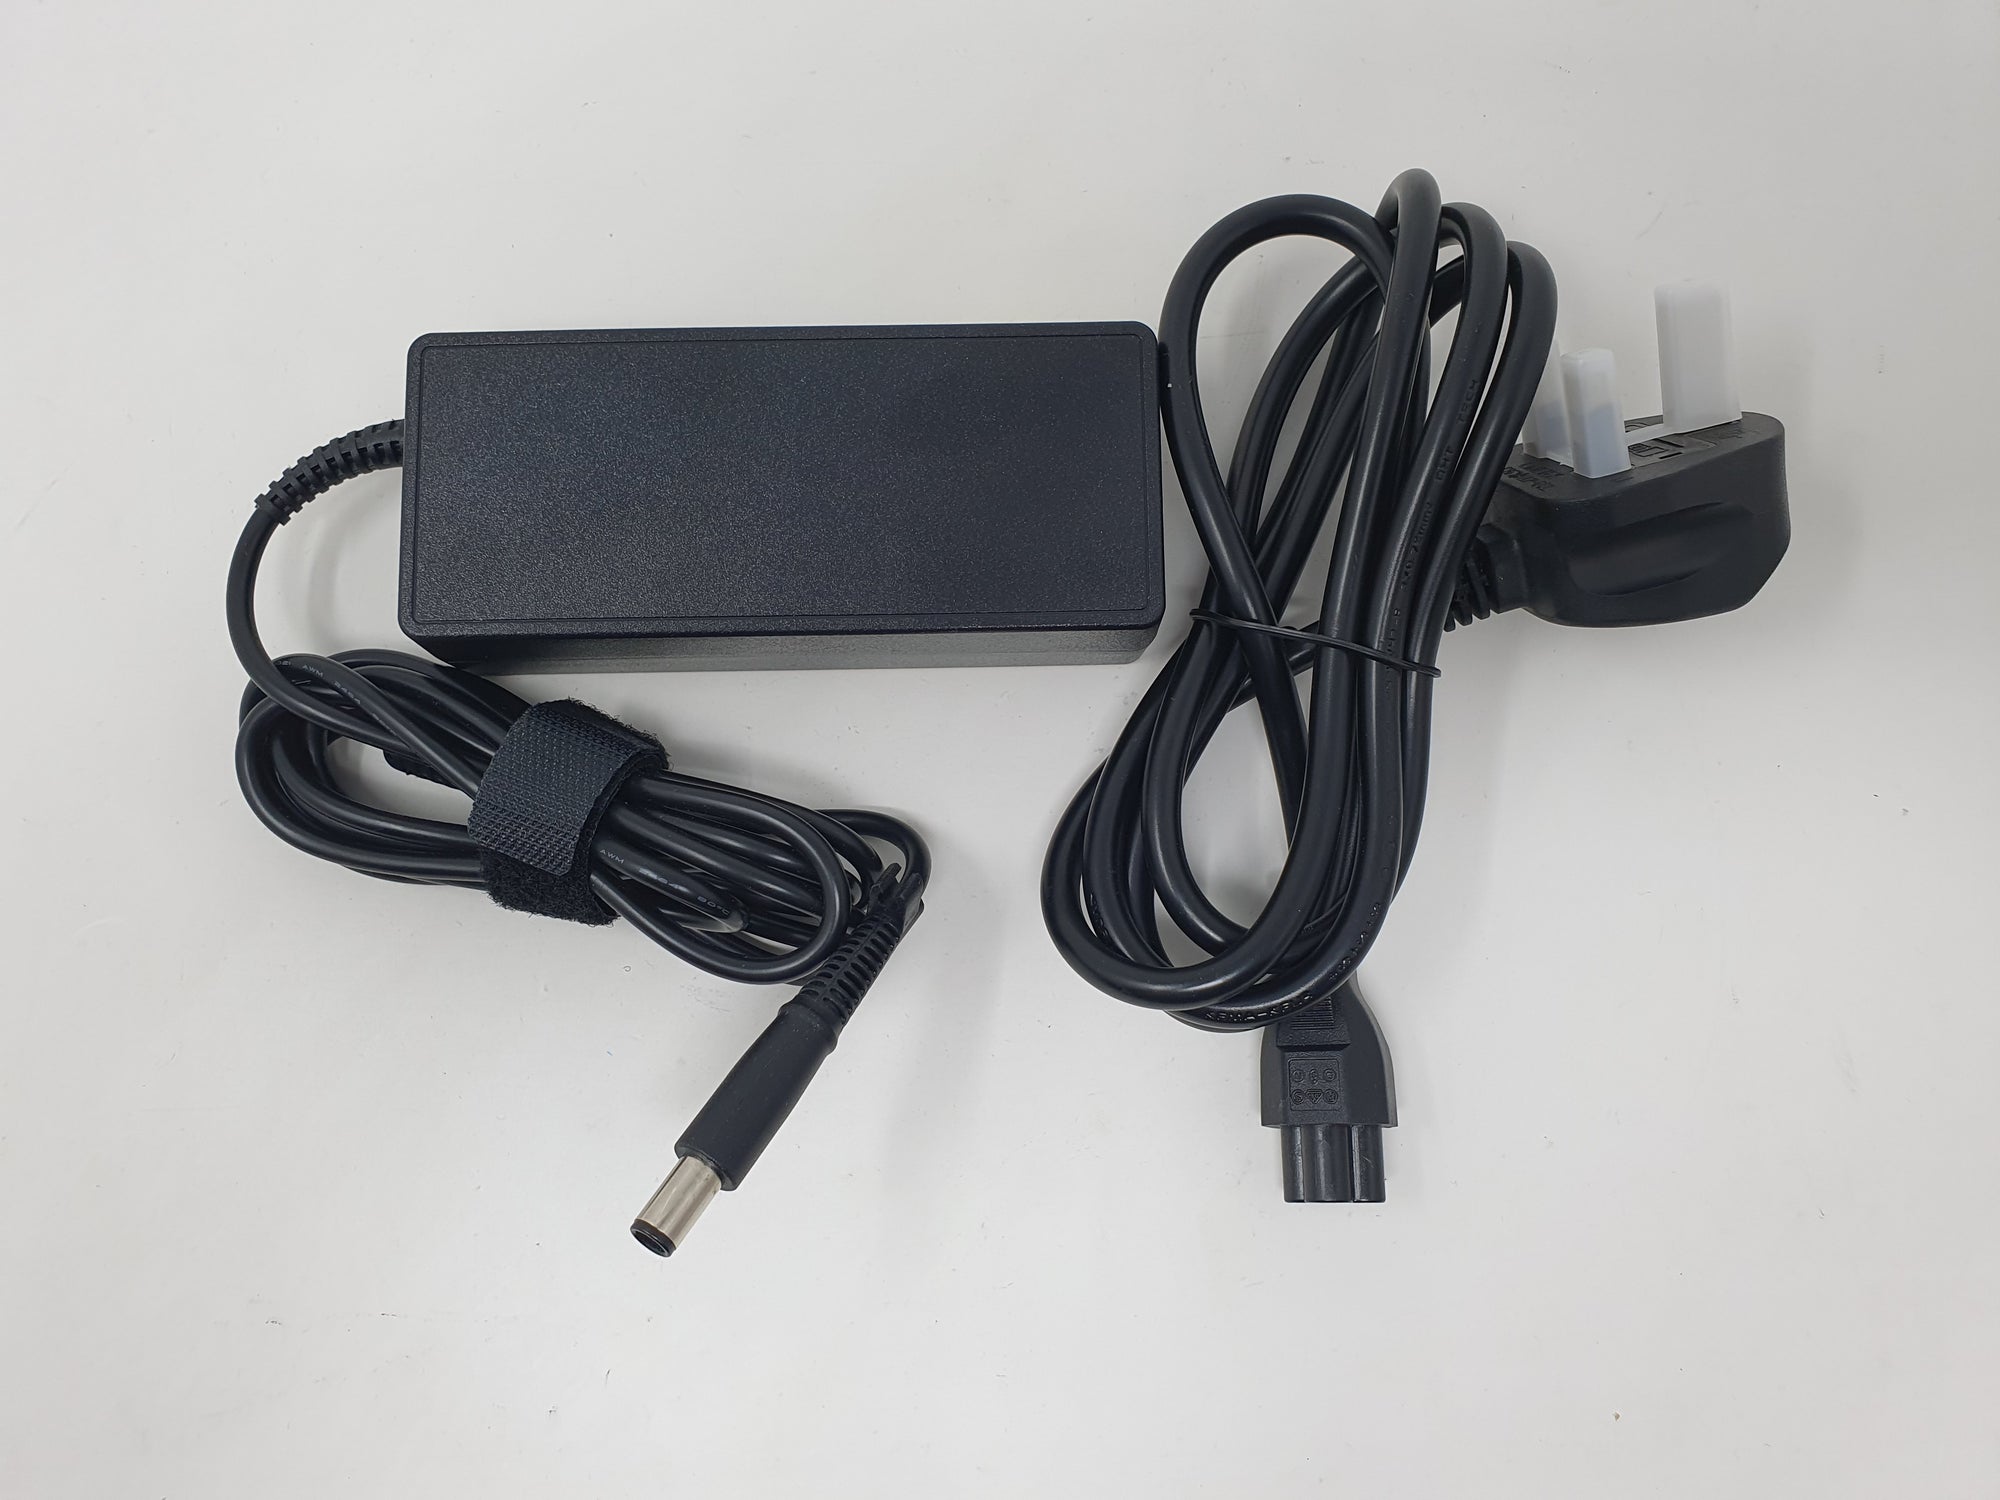 HP Laptop Charger Power Adaptor 19v 4.7a 18.5v 3.5a